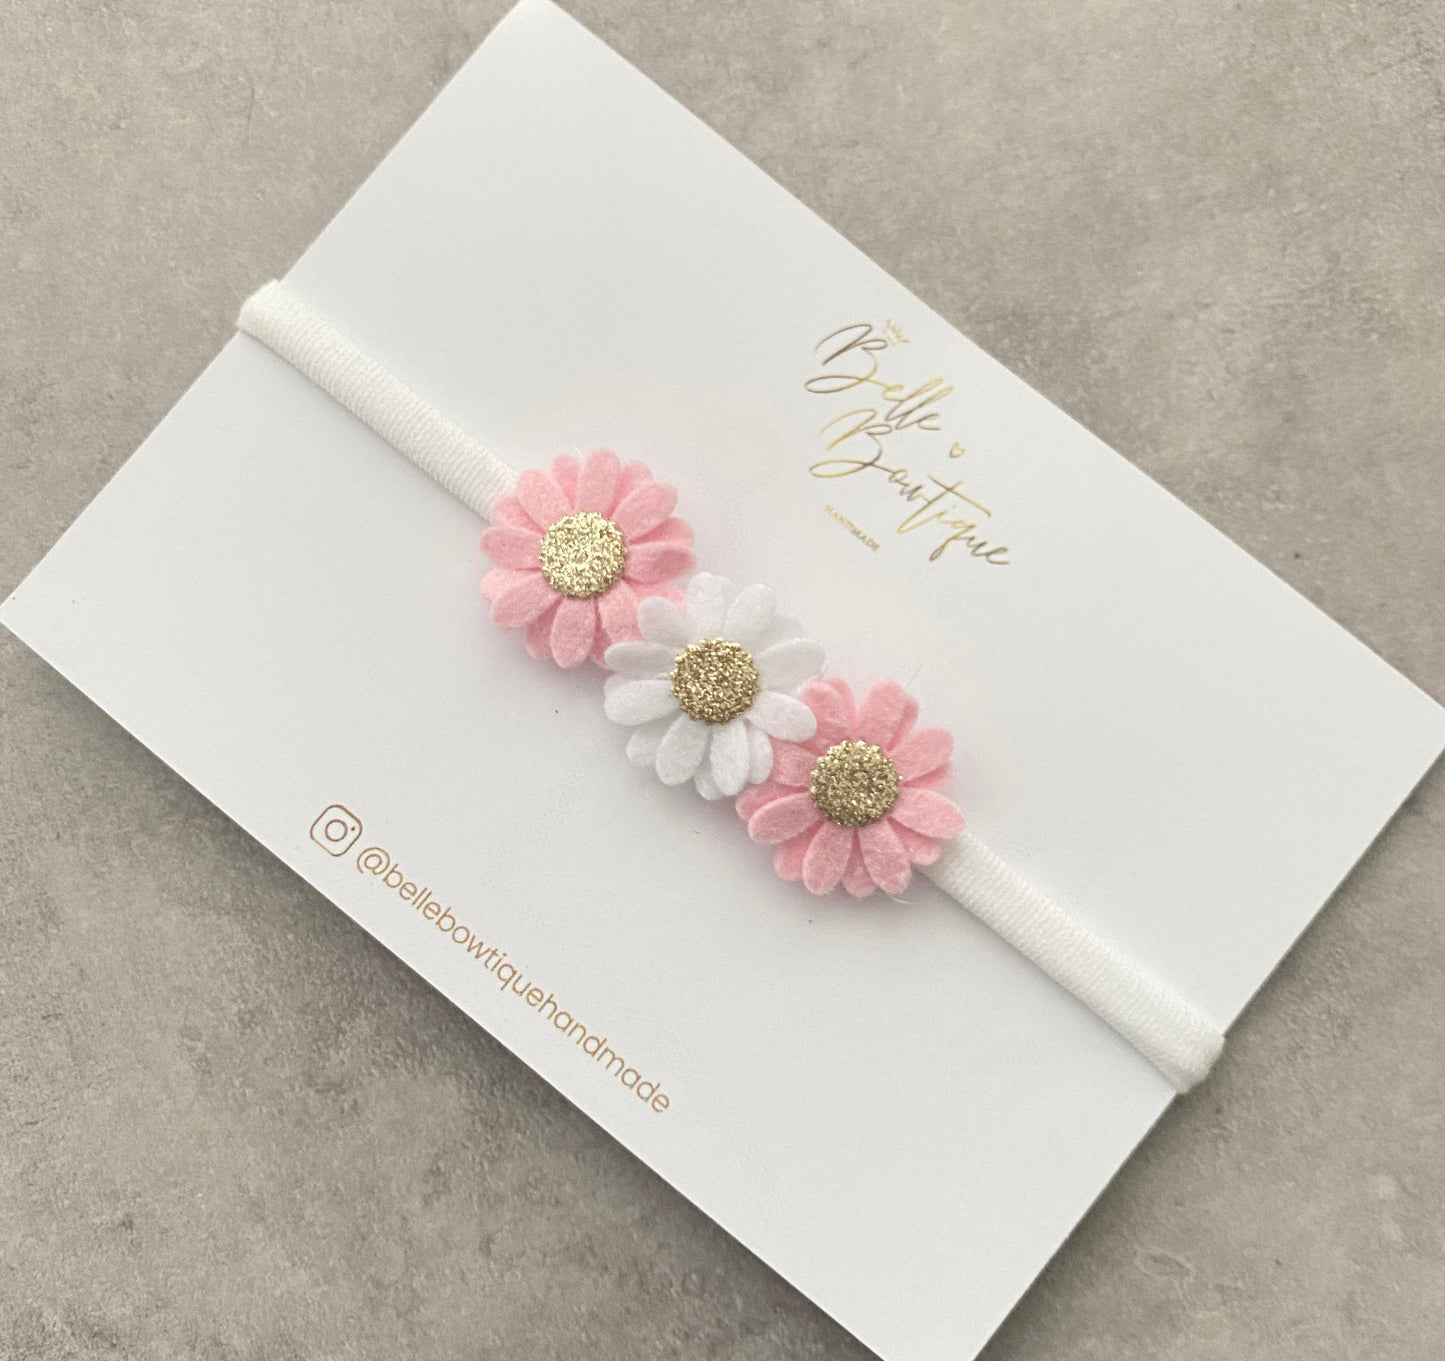 Daisy Collection | White Pink Daisy Flowers |  Newborn Headband | Christening Bows |  Baby Photo Prop | Hair Accessories for Babies